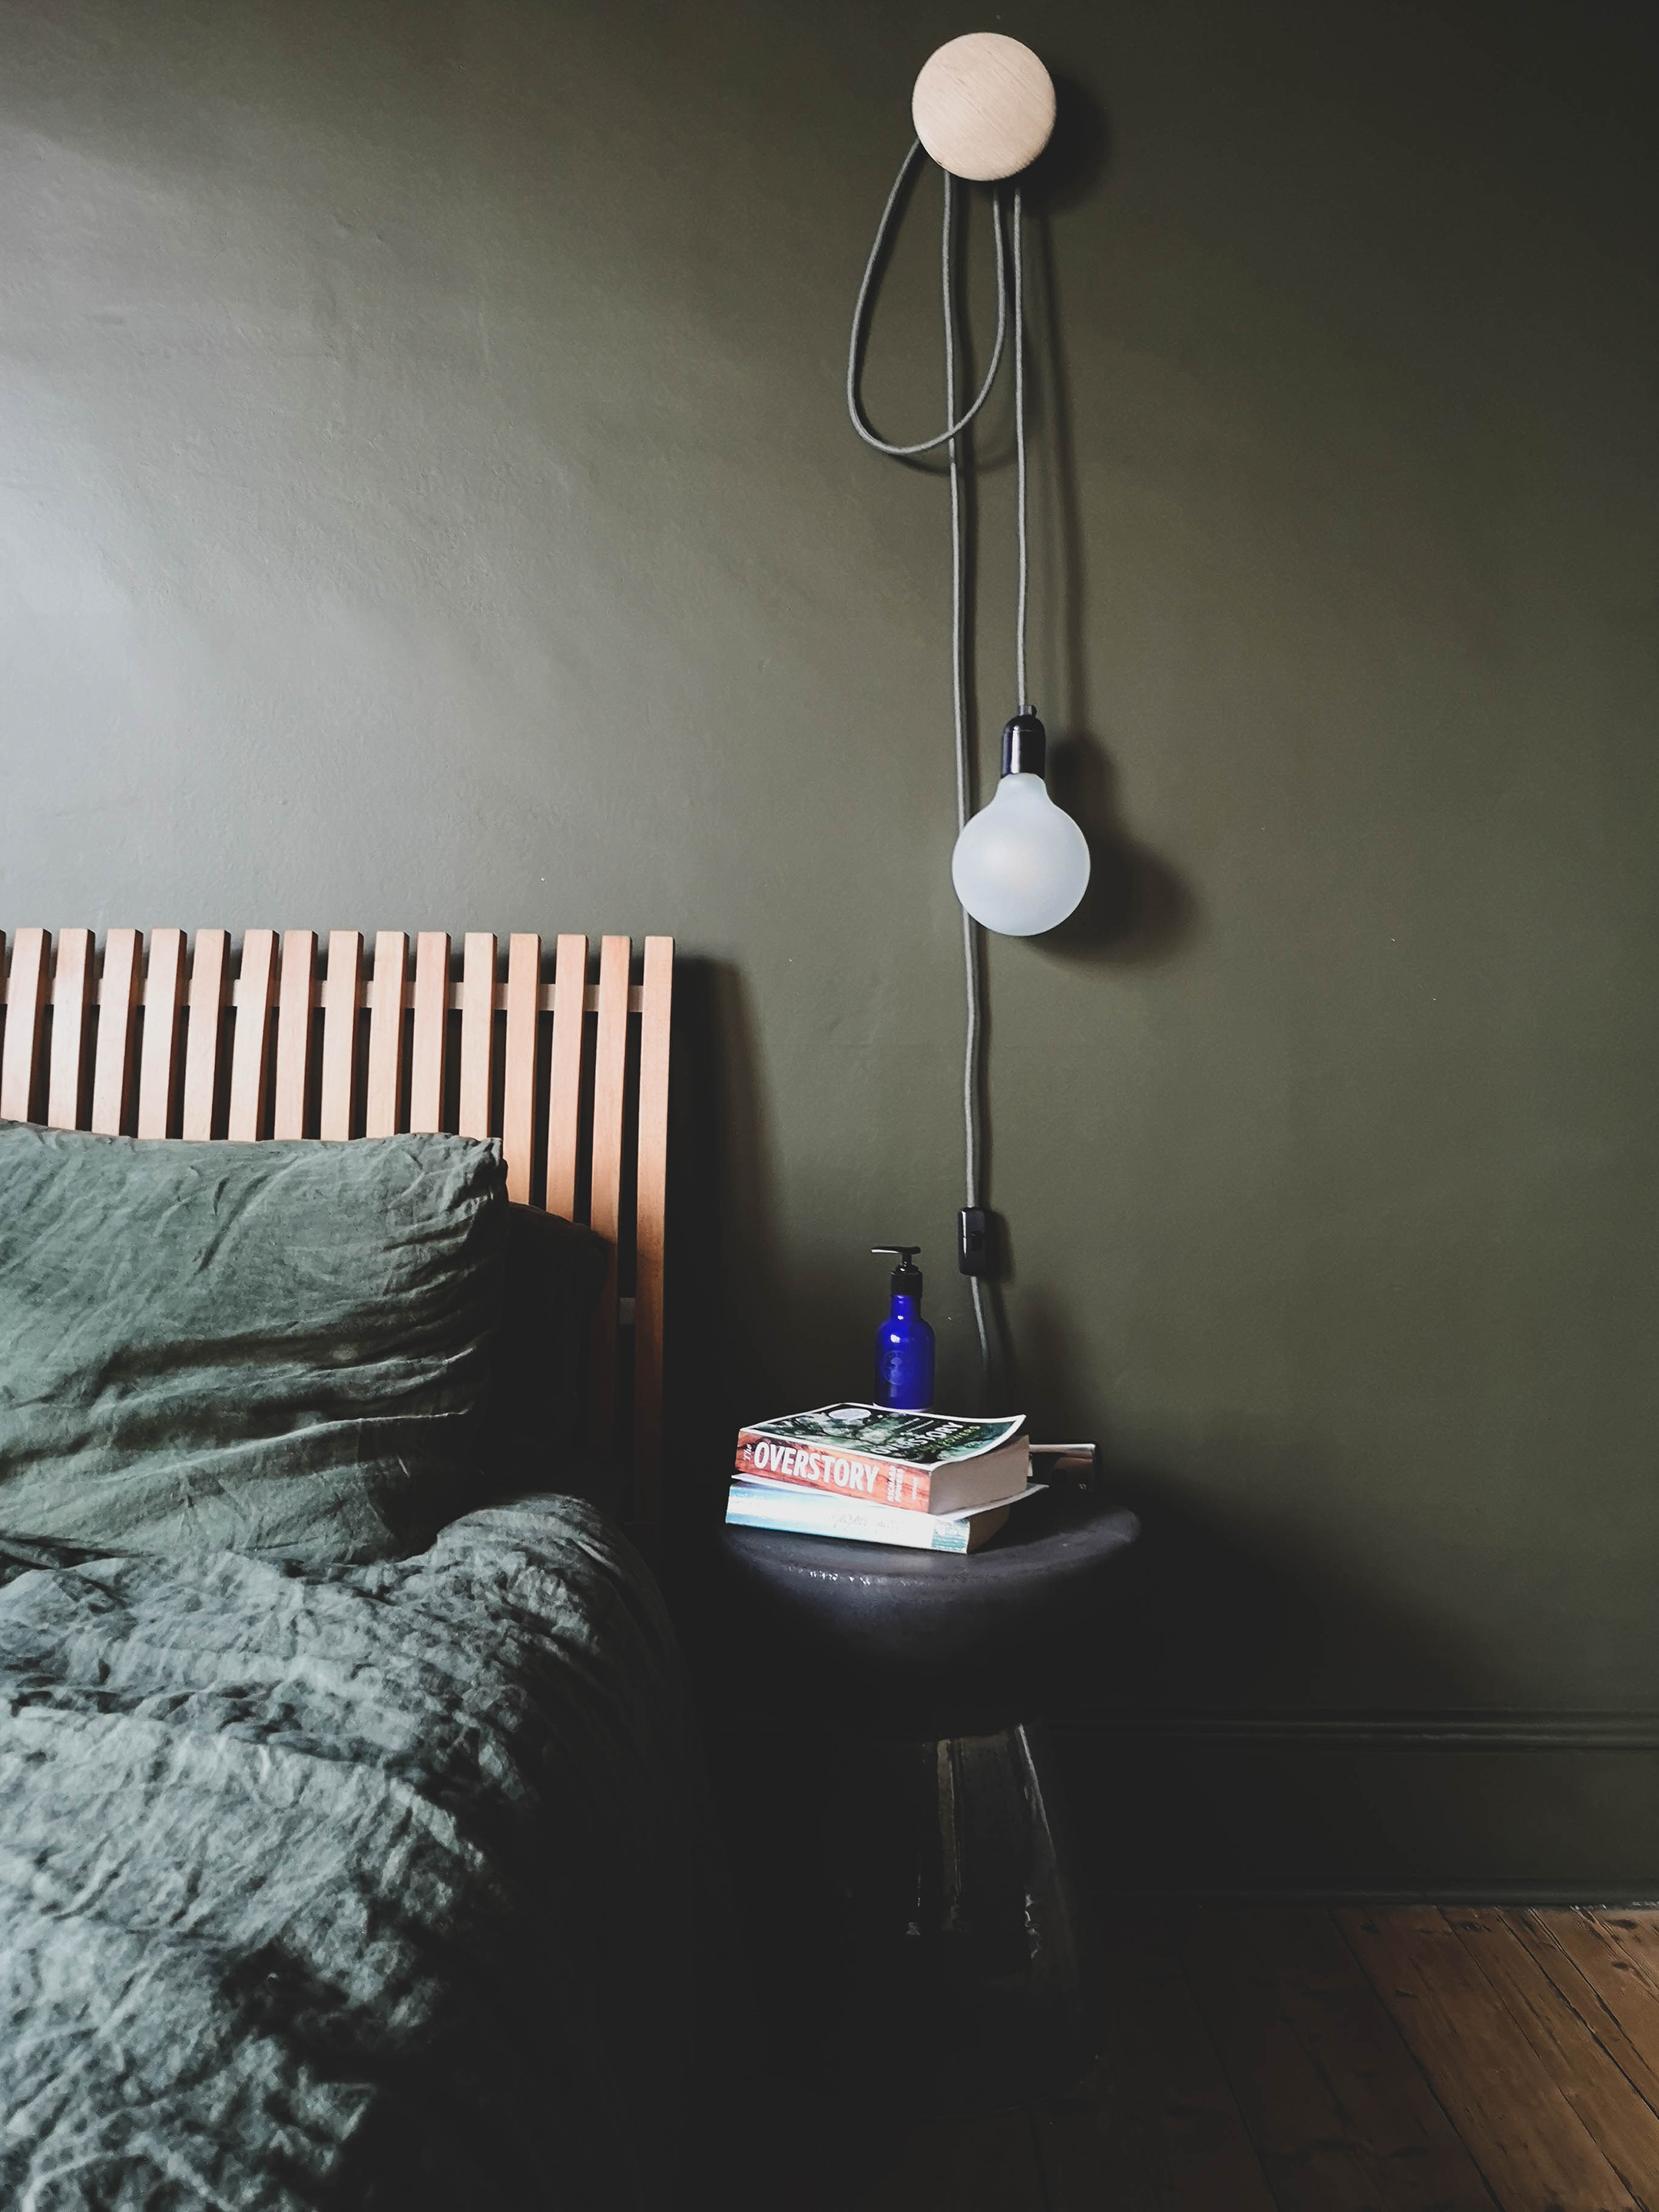 A picture of a bed against the dark green walls of the re-designed bedroom. The bumpy rough texture of the original walls in this victorian terrace add to the rustic, crumpled character of the room. A simply decorative bulb hangs from a hook beside the bed over a ceramic bedside table.